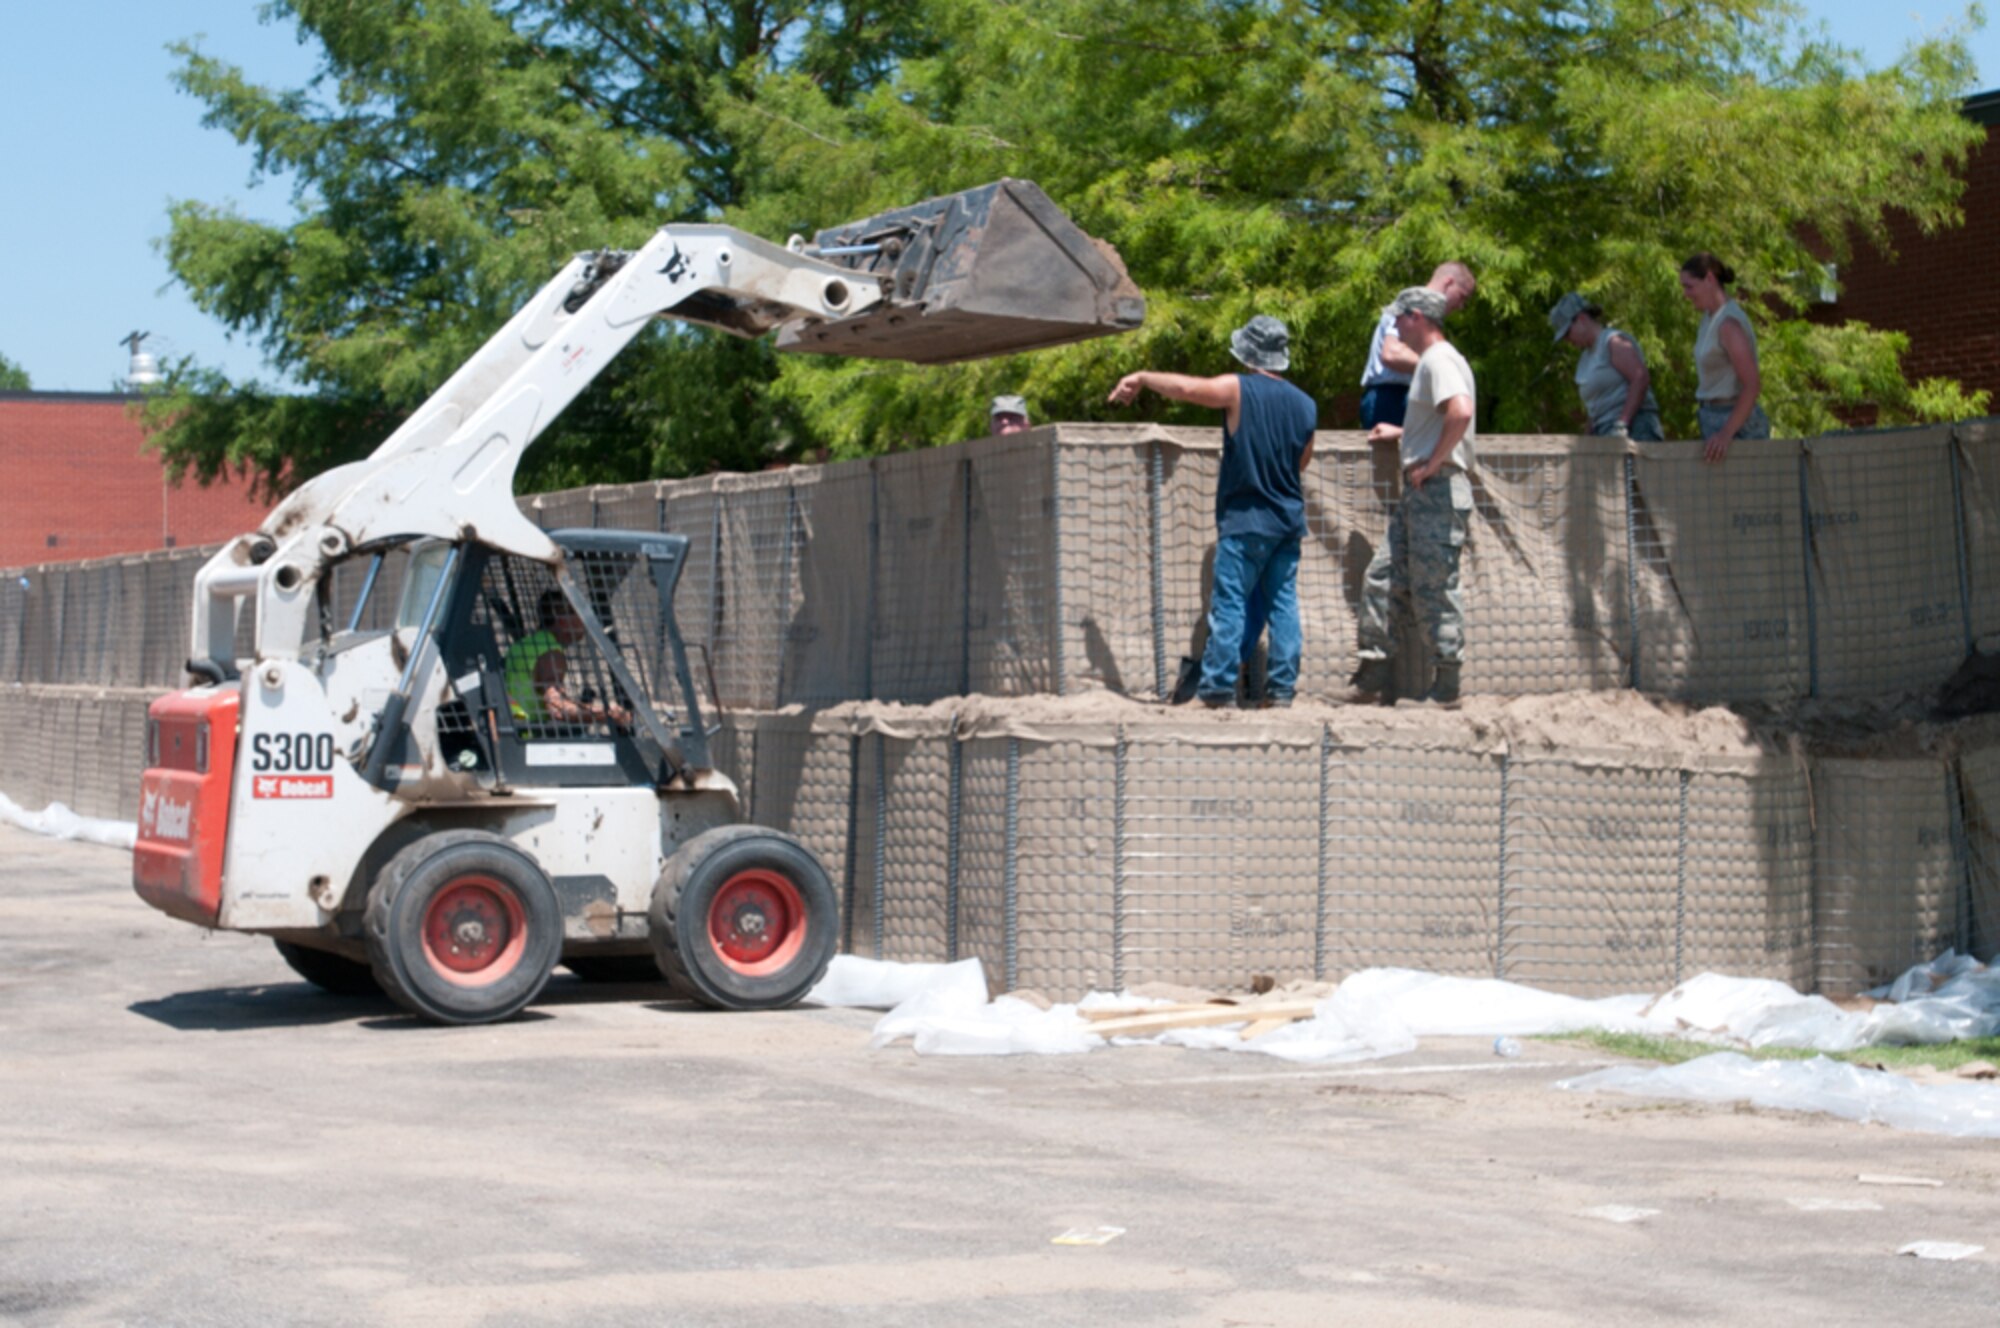 Airmen with the Missouri Air National Guard’s 139th Airlift Wing erect HESCO barriers around various buildings at Rosecrans Air National Guard Base, St. Joseph, Mo., July 12, 2011. The sand-filled barriers are being installed as a precautionary measure should the Missouri River breach the levees here. (U.S. Air Force photo by Staff Sgt. Michael Crane)